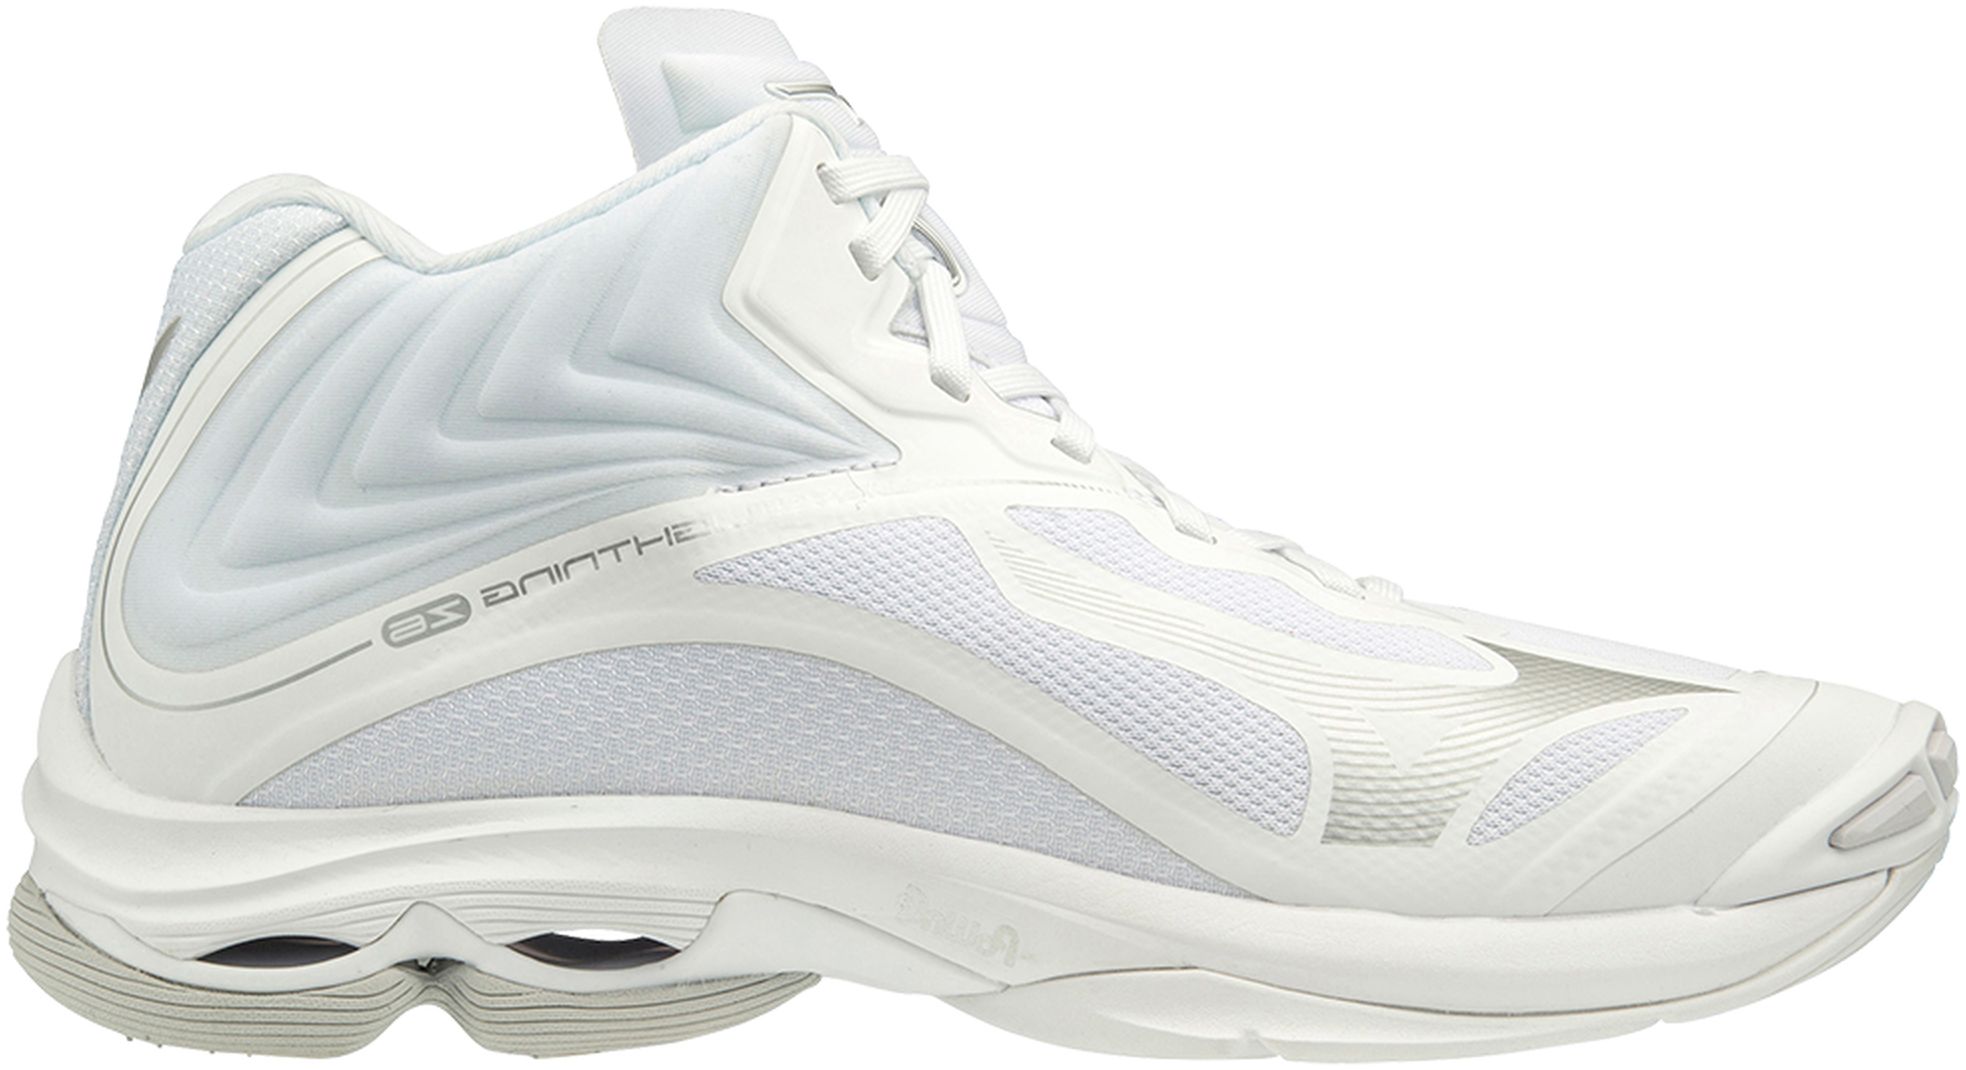 mizuno volleyball shoes mid